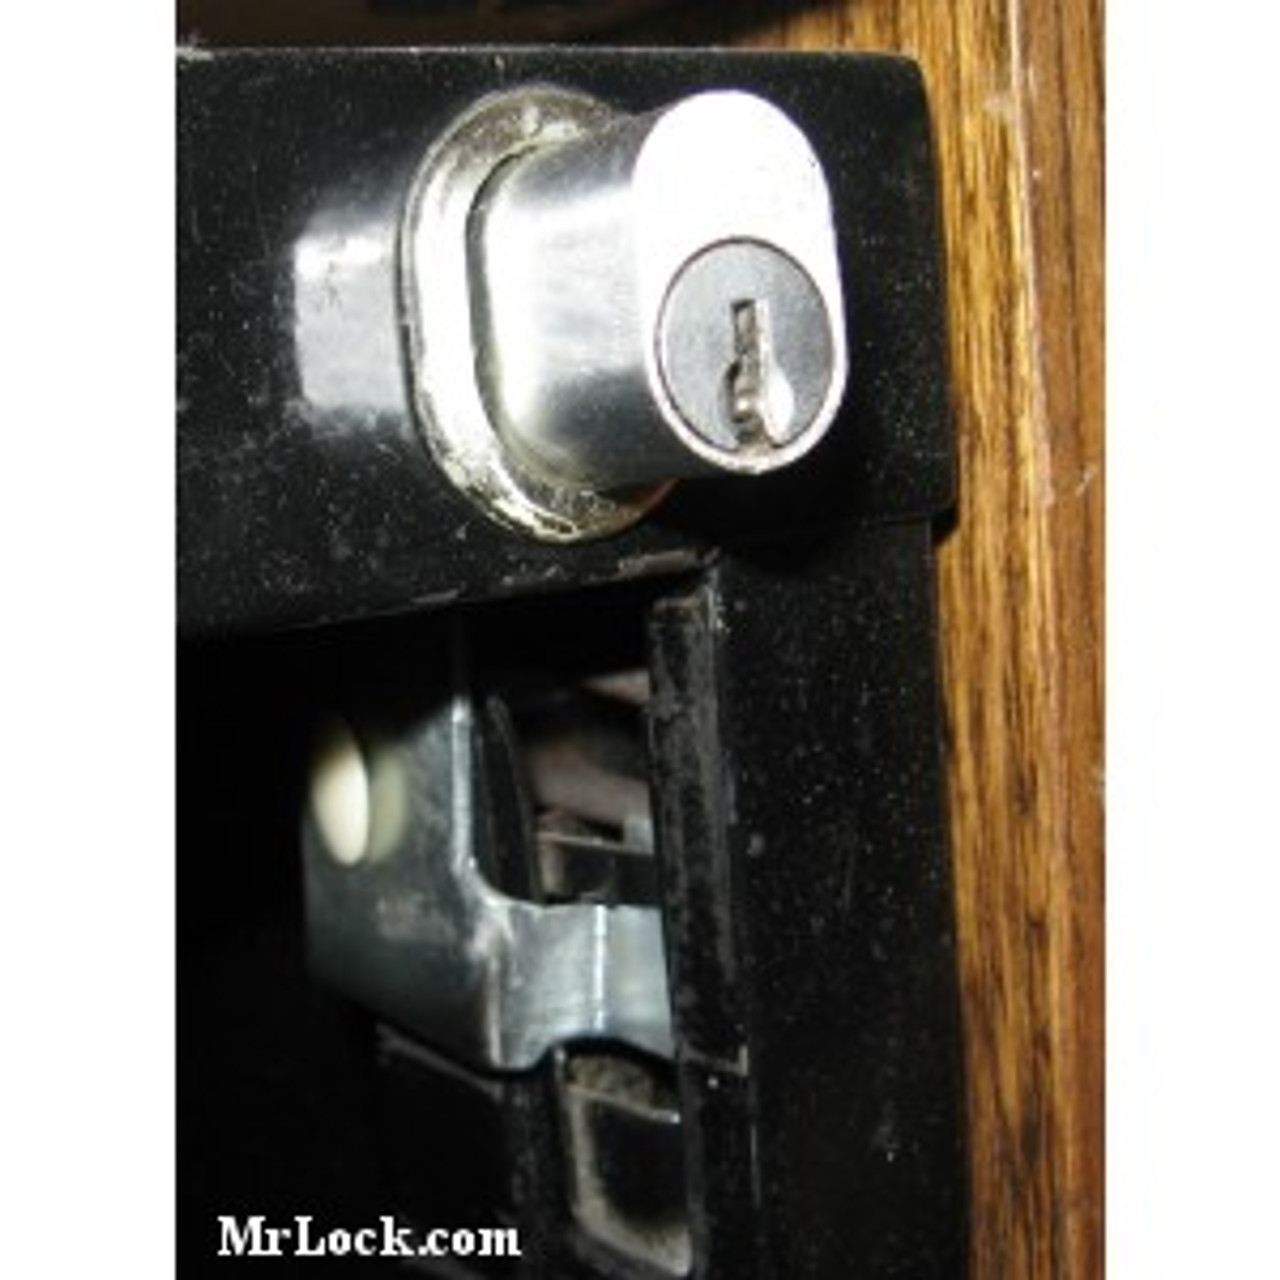 Lock Kit for File Cabinet Fits HON F26 Styles, Keyed Different